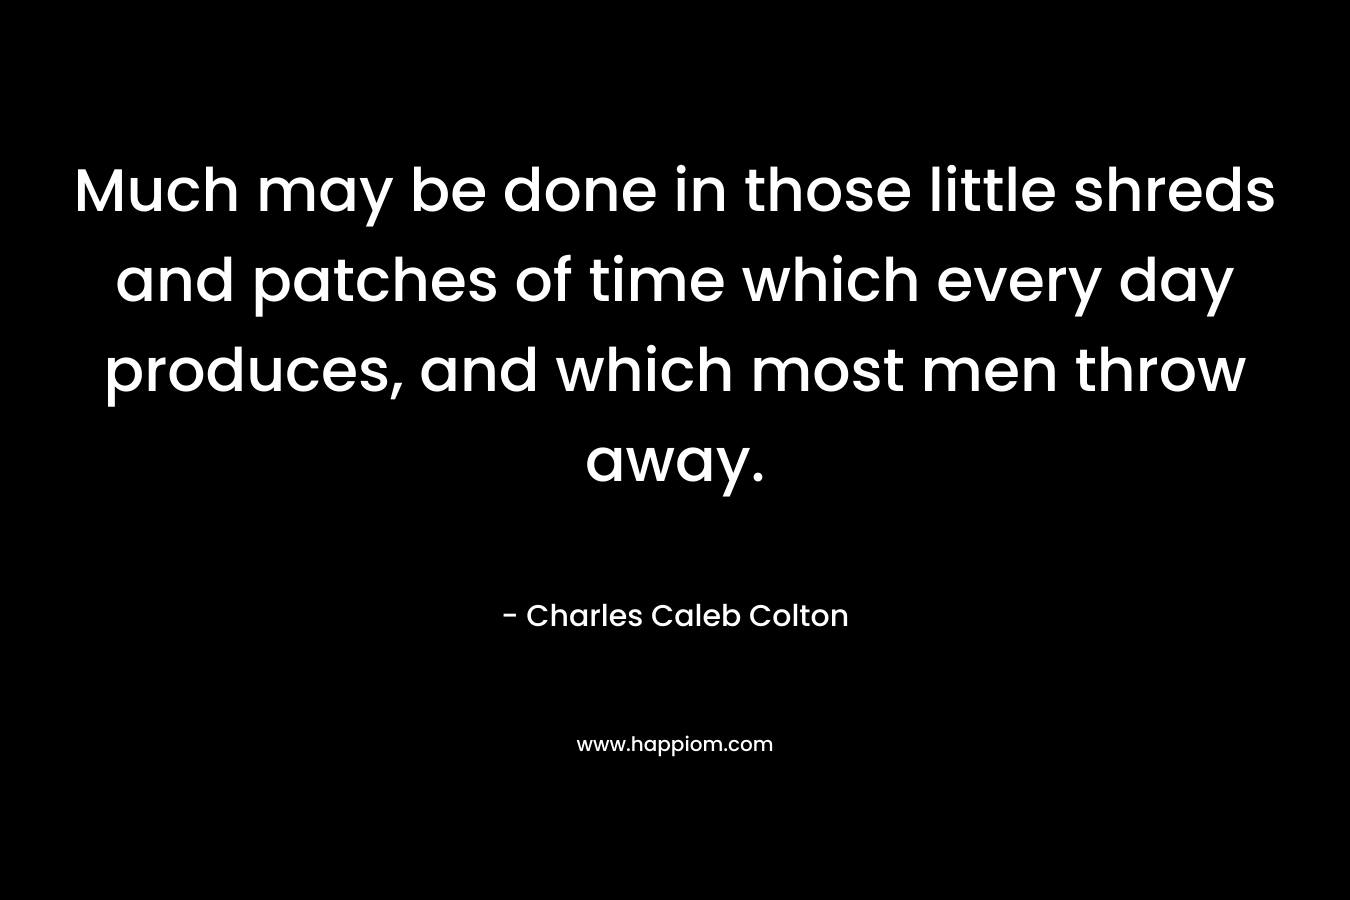 Much may be done in those little shreds and patches of time which every day produces, and which most men throw away. – Charles Caleb Colton